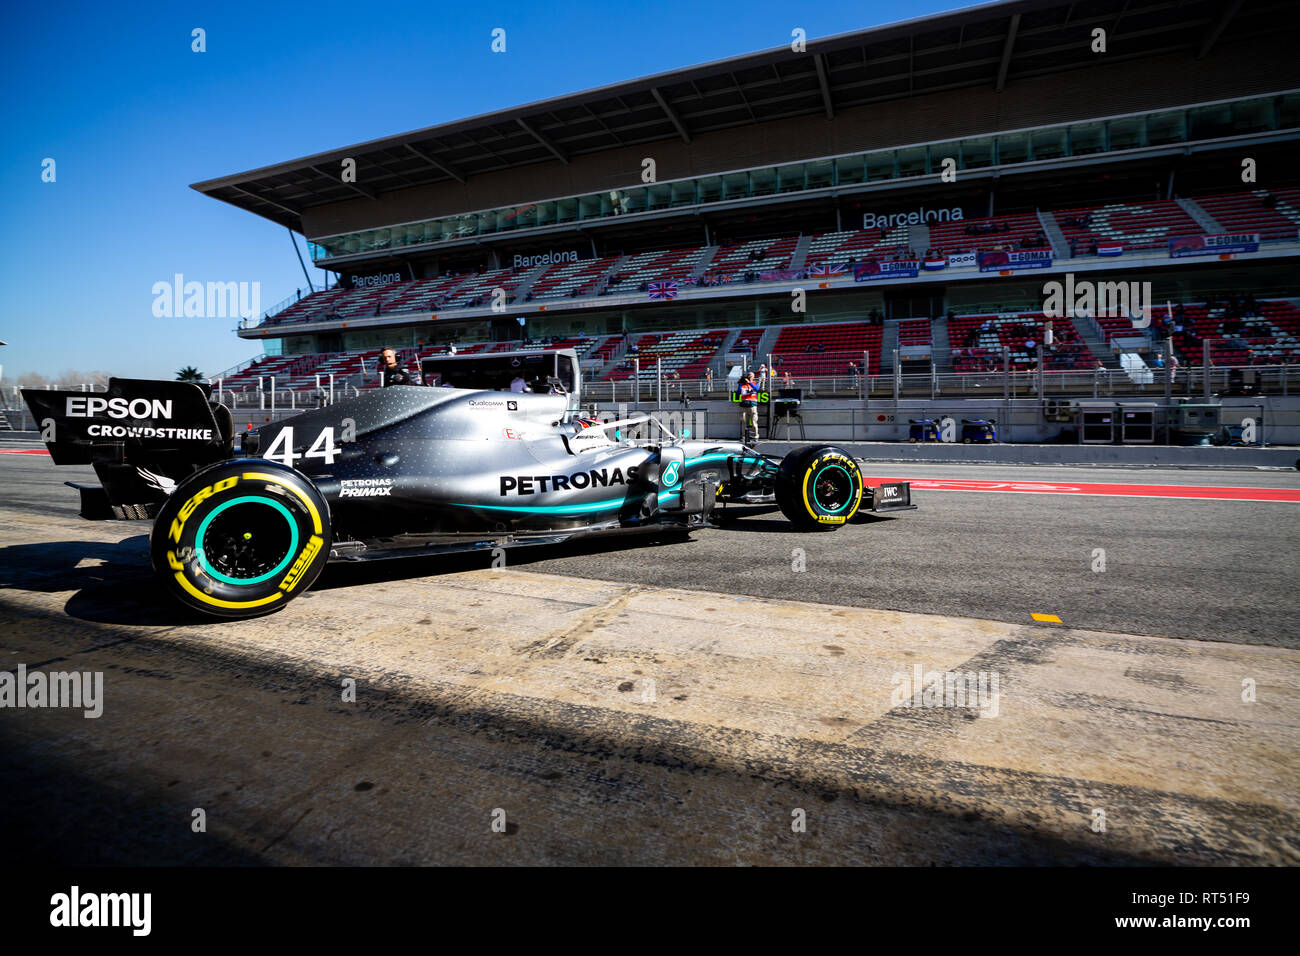 Lewis Hamilton of Mercedes AMG Petronas Formula One Team during the second journey of second week F1 Test Days in Montmelo circuit. Stock Photo